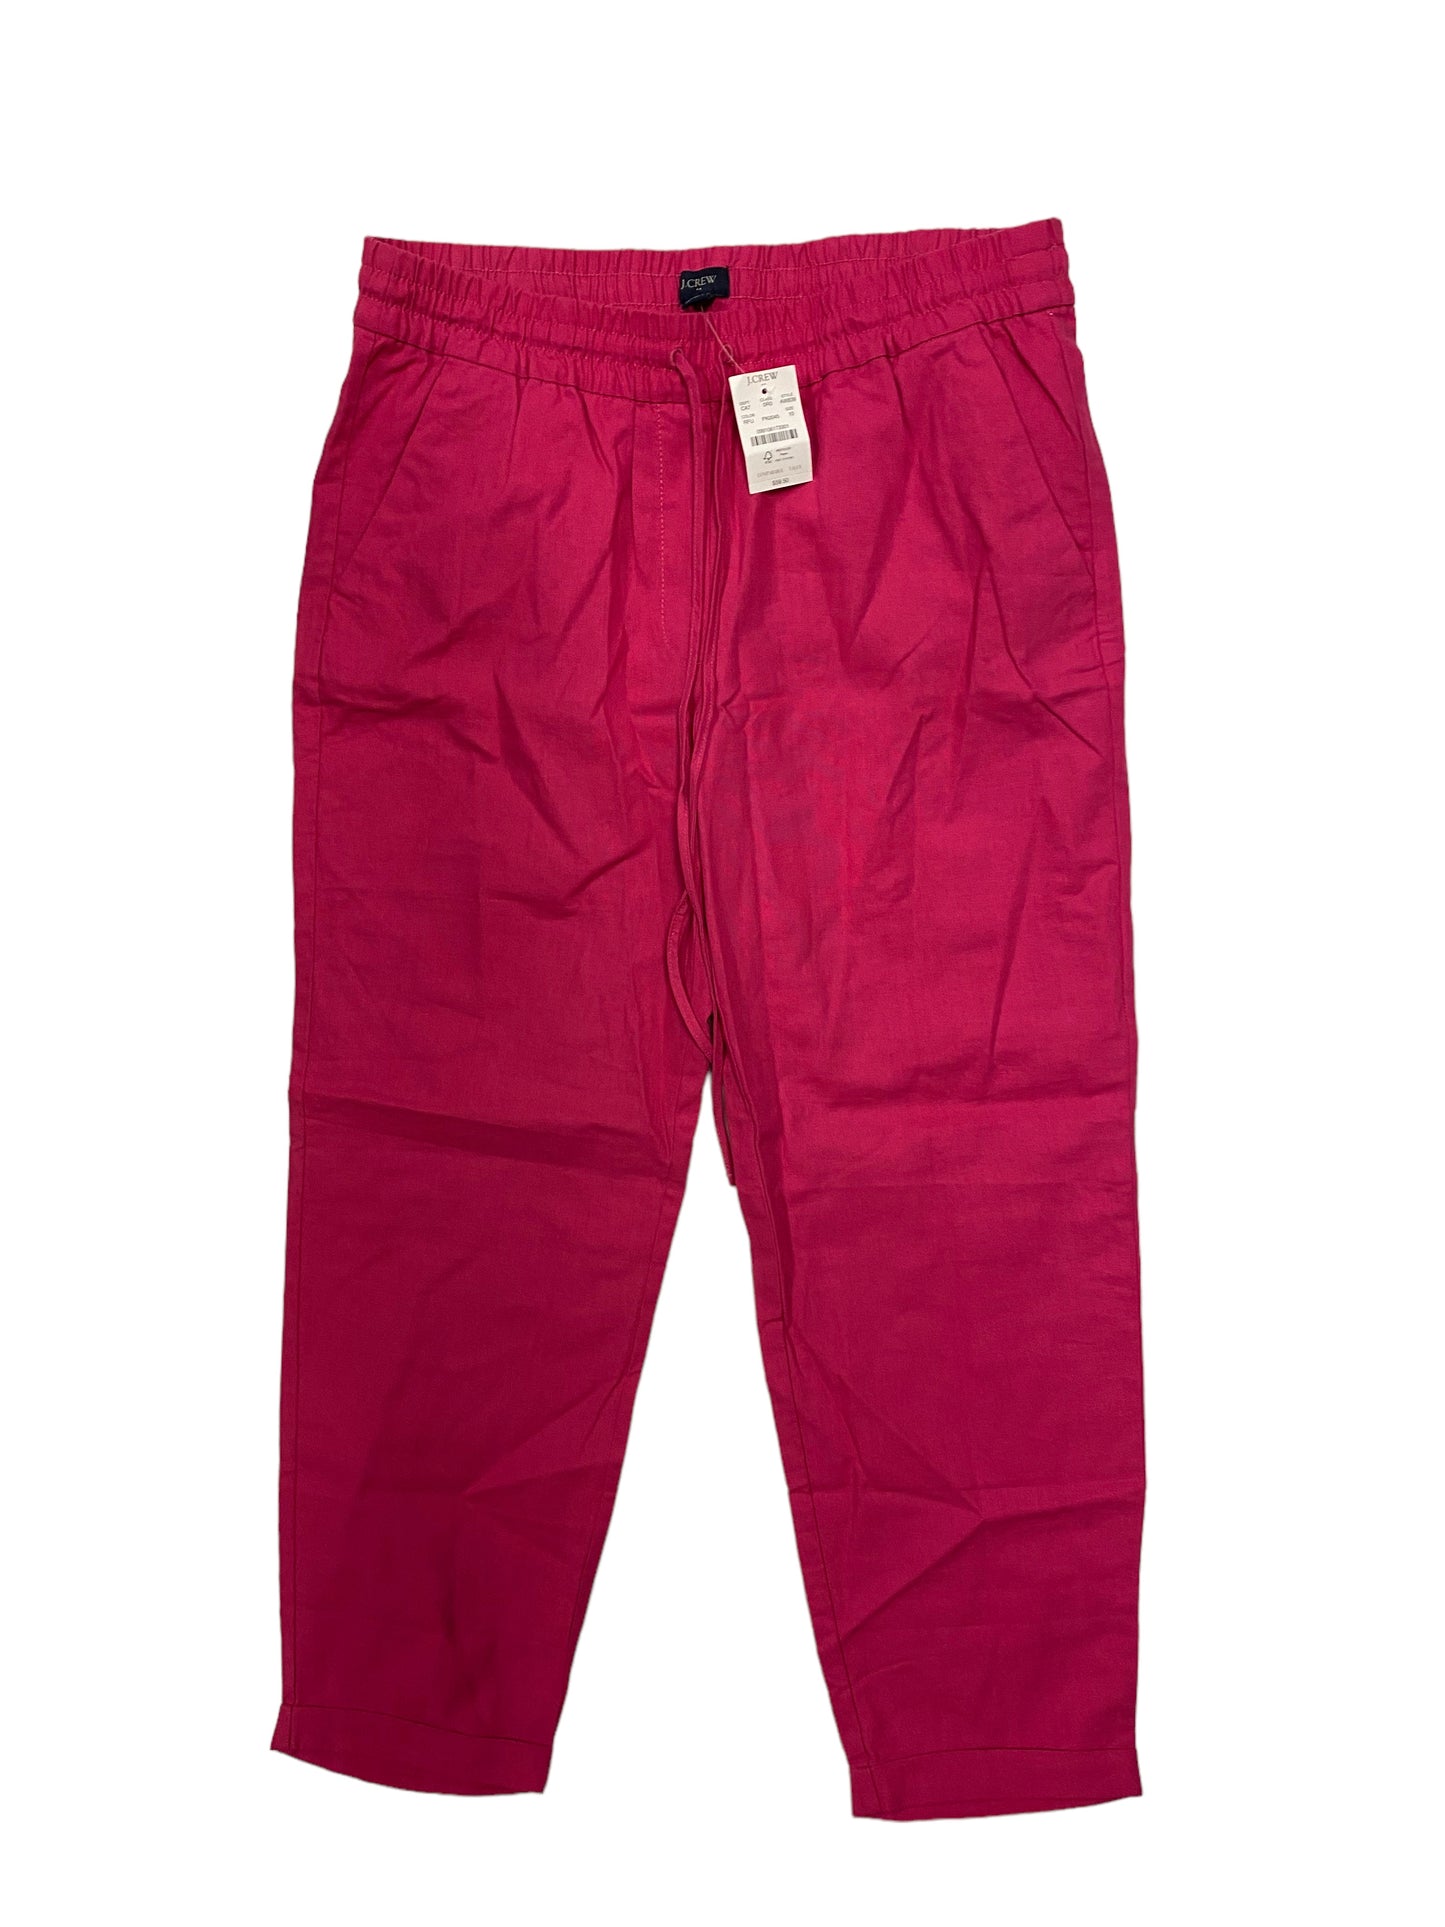 Pink Pants Other J. Crew, Size 10